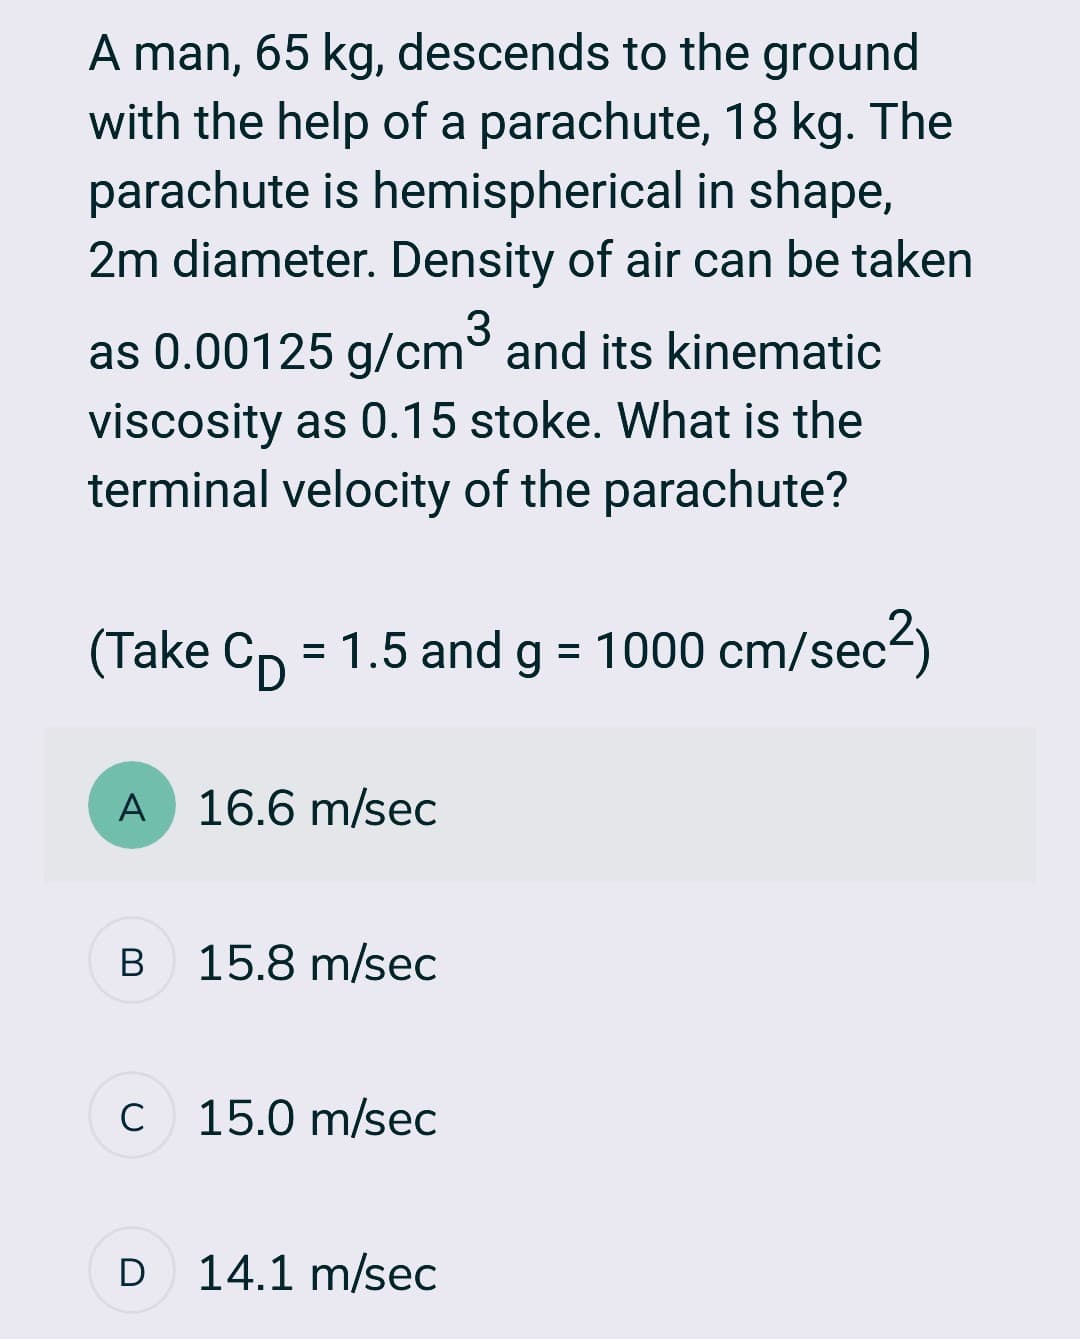 A man, 65 kg, descends to the ground
with the help of a parachute, 18 kg. The
parachute is hemispherical in shape,
2m diameter. Density of air can be taken
as 0.00125 g/cm³ and its kinematic
viscosity as 0.15 stoke. What is the
terminal velocity of the parachute?
(Take C₁ = 1.5 and g = 1000 cm/sec²)
A
B
с
D
16.6 m/sec
15.8 m/sec
15.0 m/sec
14.1 m/sec